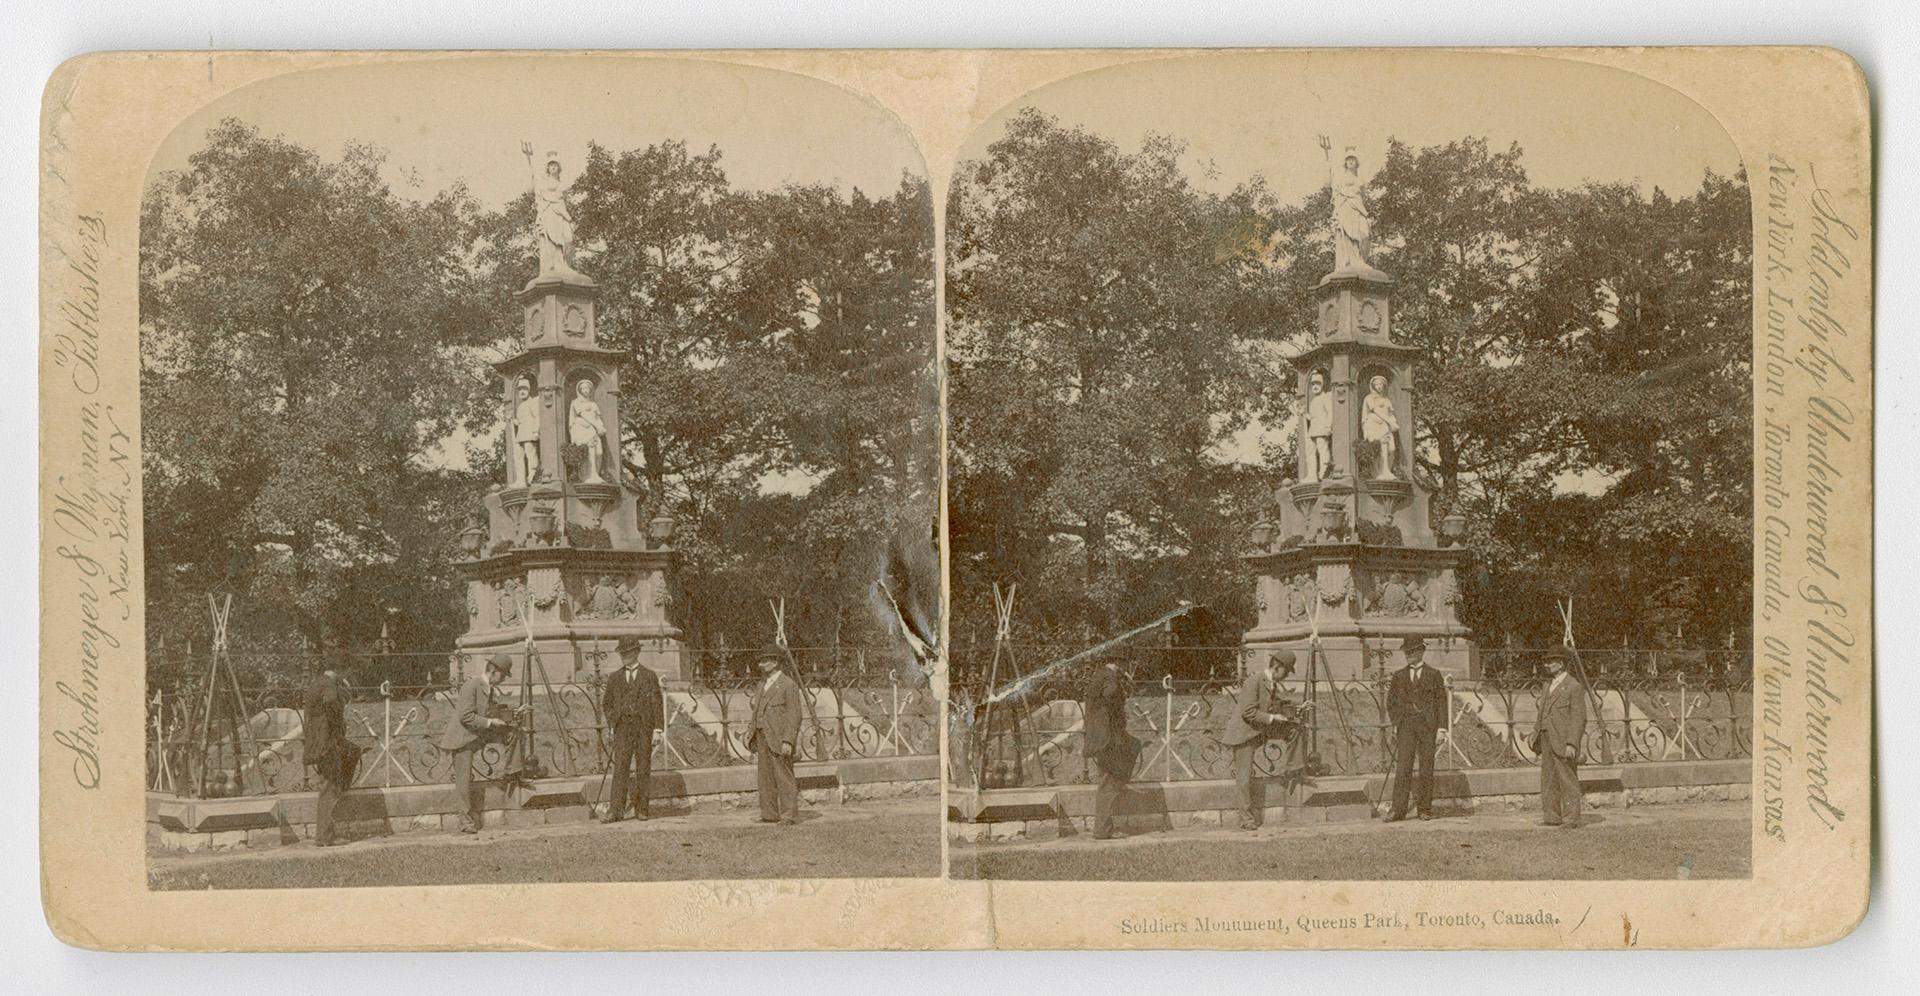 Pictures show four men standing in from of a large memorial with steps leading up to it.